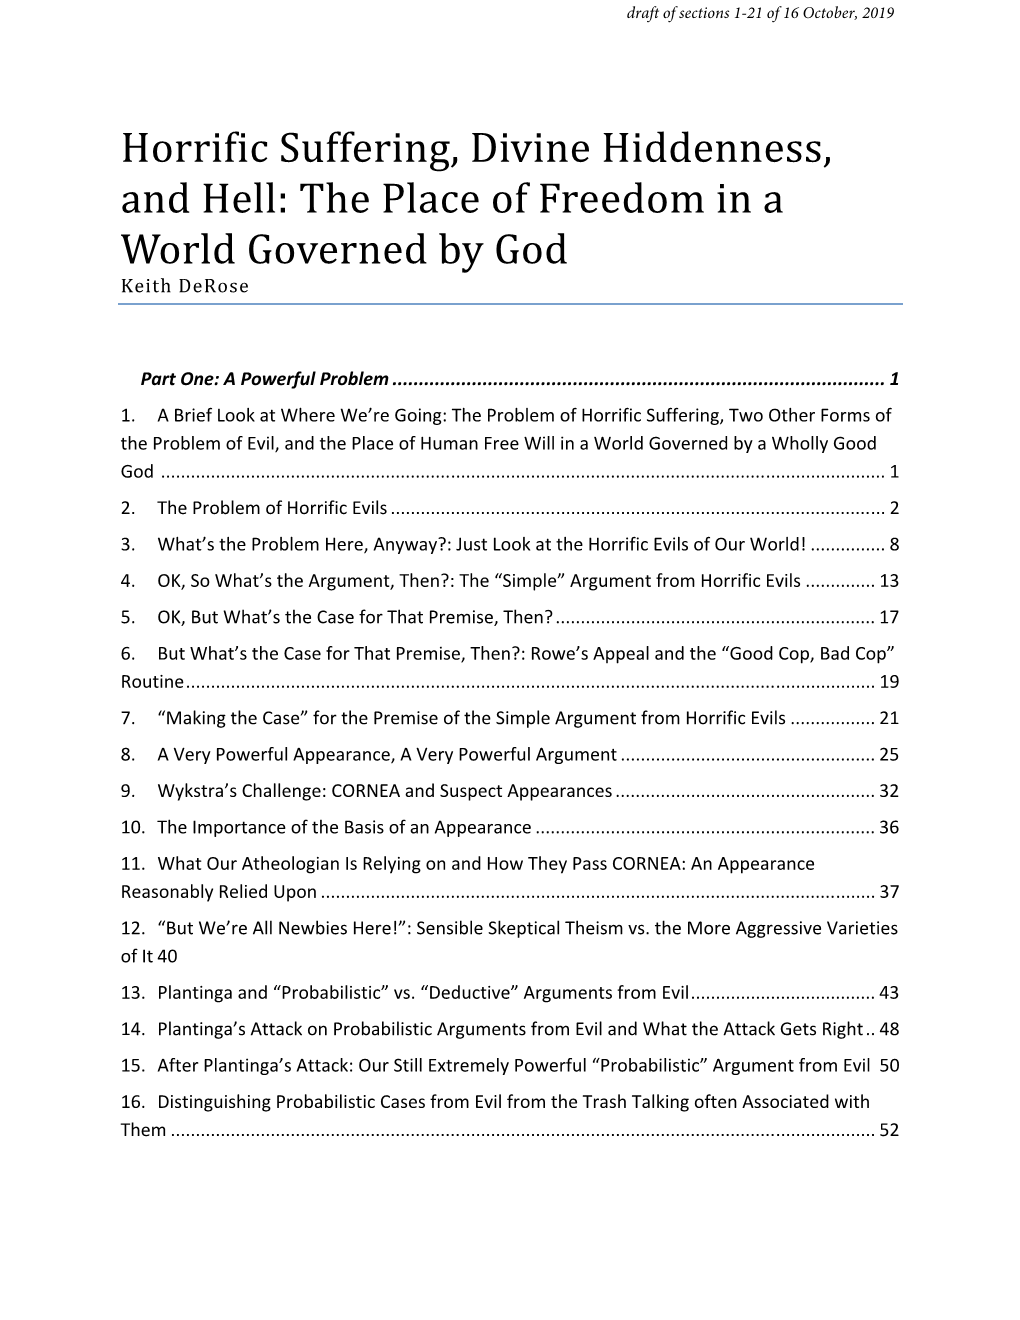 Horrific Suffering, Divine Hiddenness, and Hell: the Place of Freedom in a World Governed by God Keith Derose